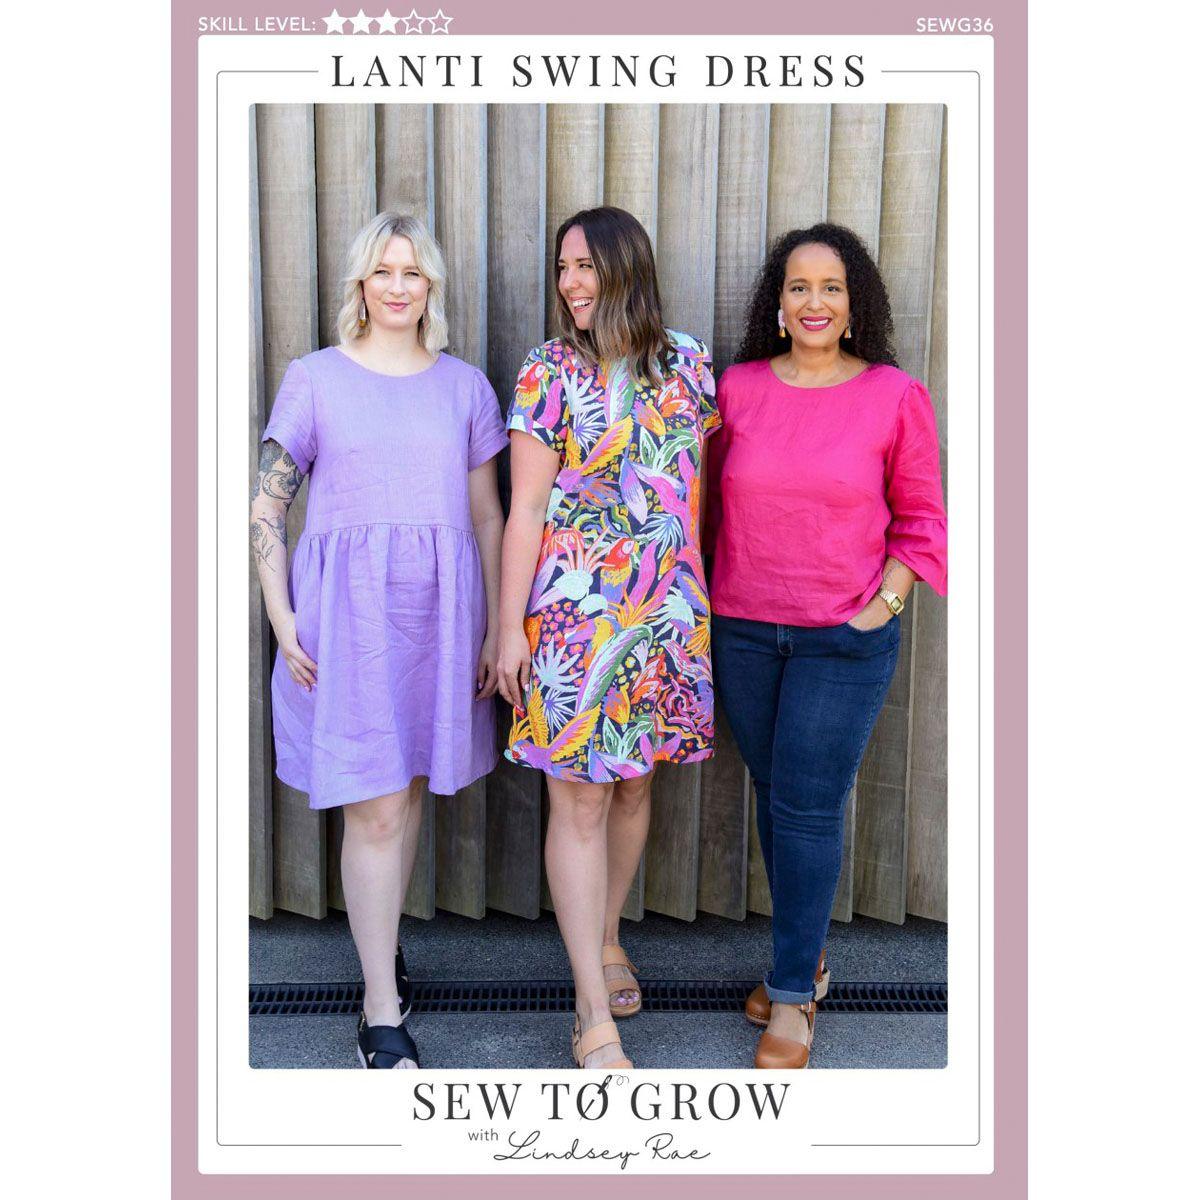 Sew To Grow Lanti Swing Dress and Top Sewing Pattern (Sizes 8 - 22)